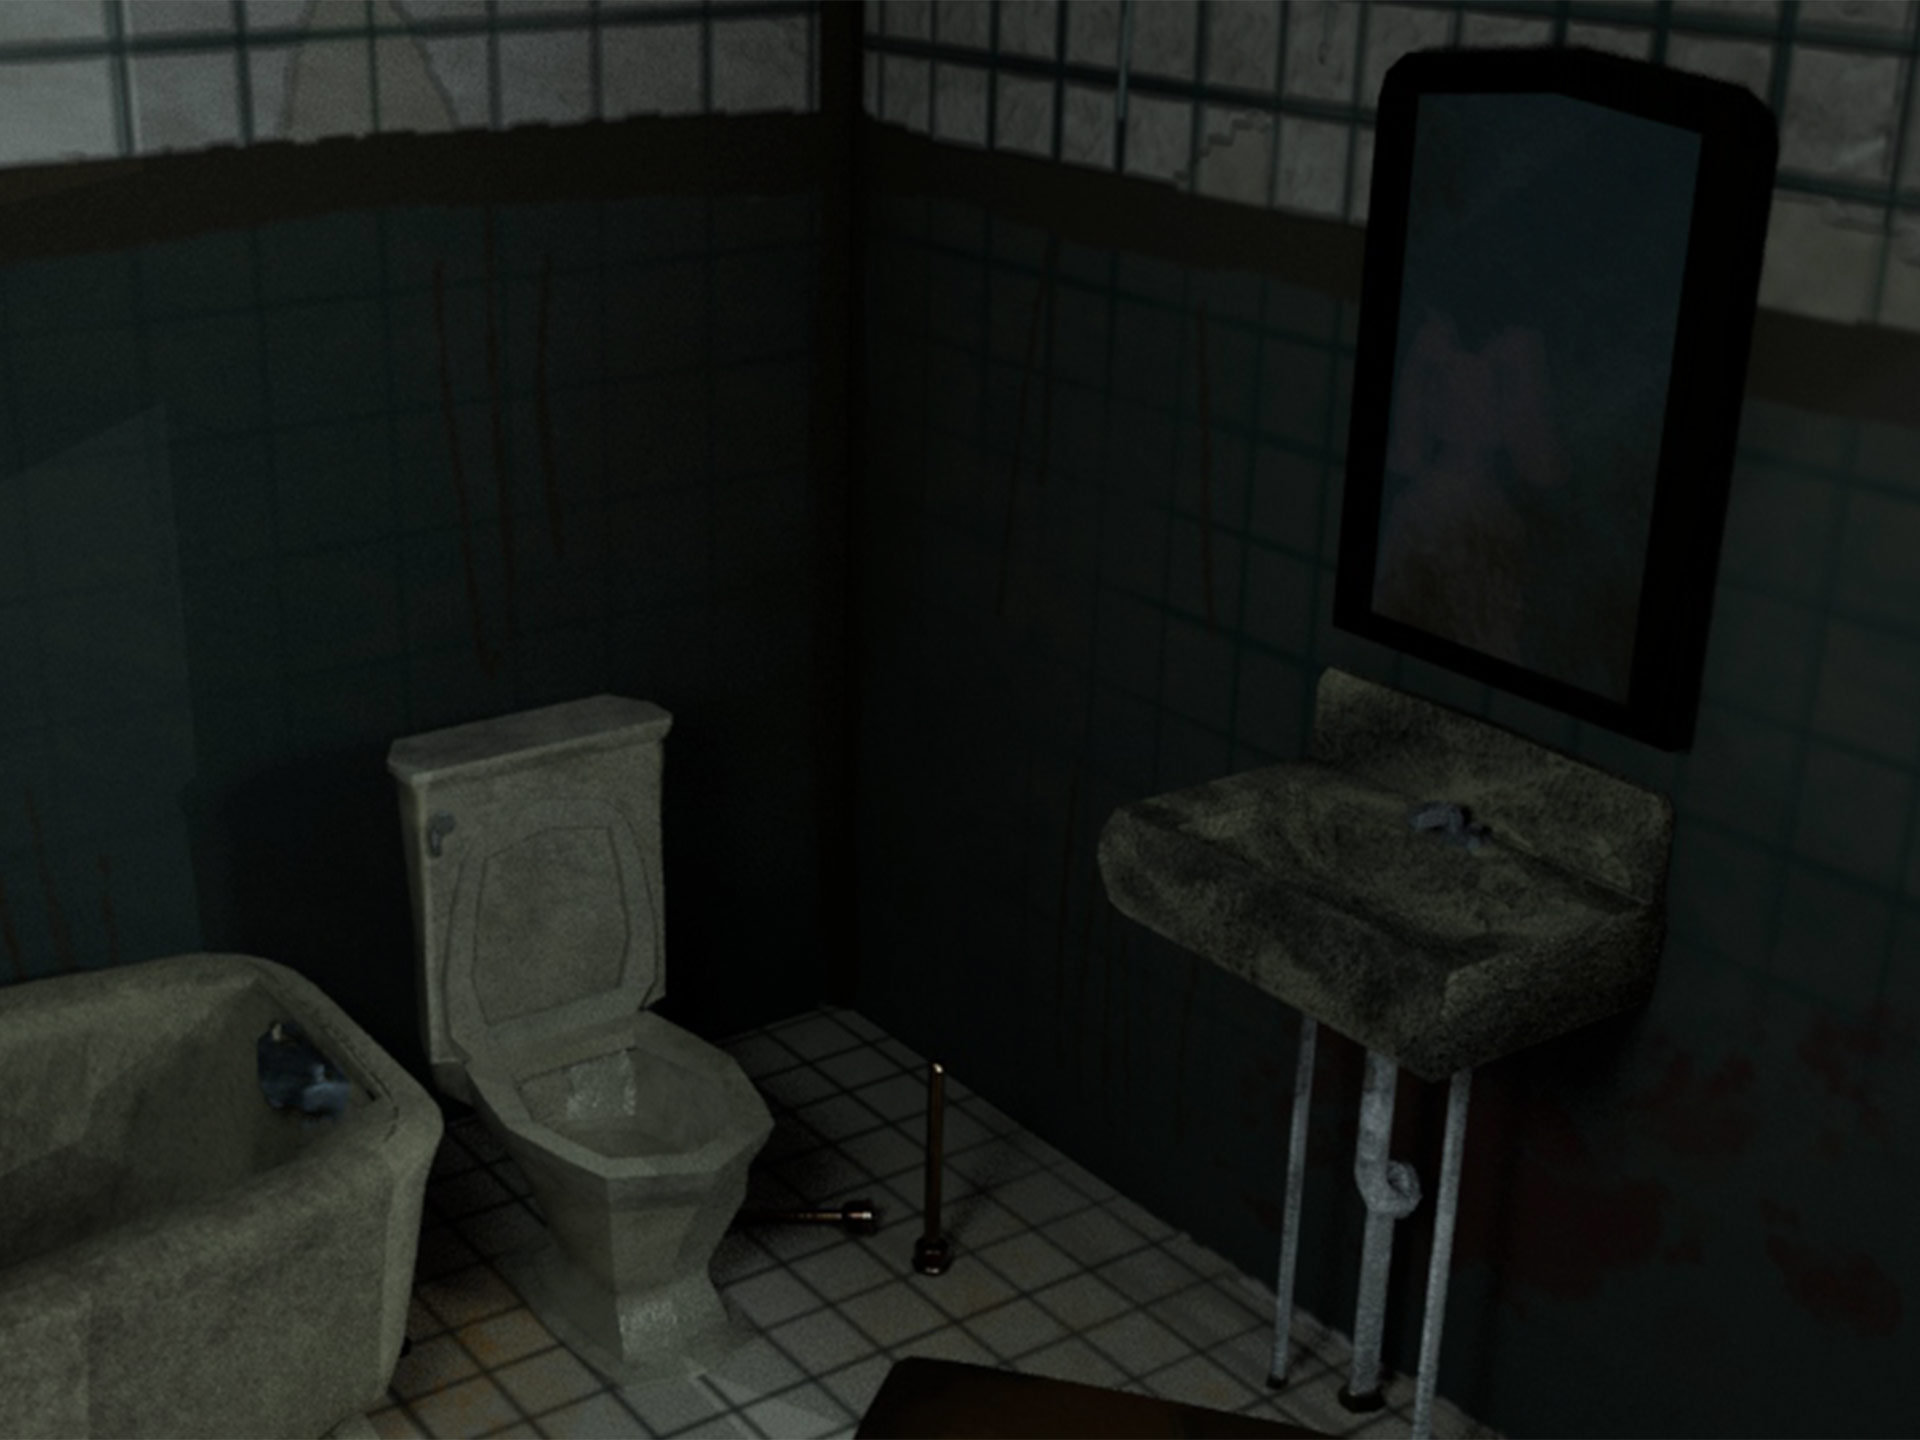 An image of another angle of this bathroom, the mirror and sink are more clearly visible in this view. There is a blurry pink bunny behind all of the dirt texture on the mirror's glass.